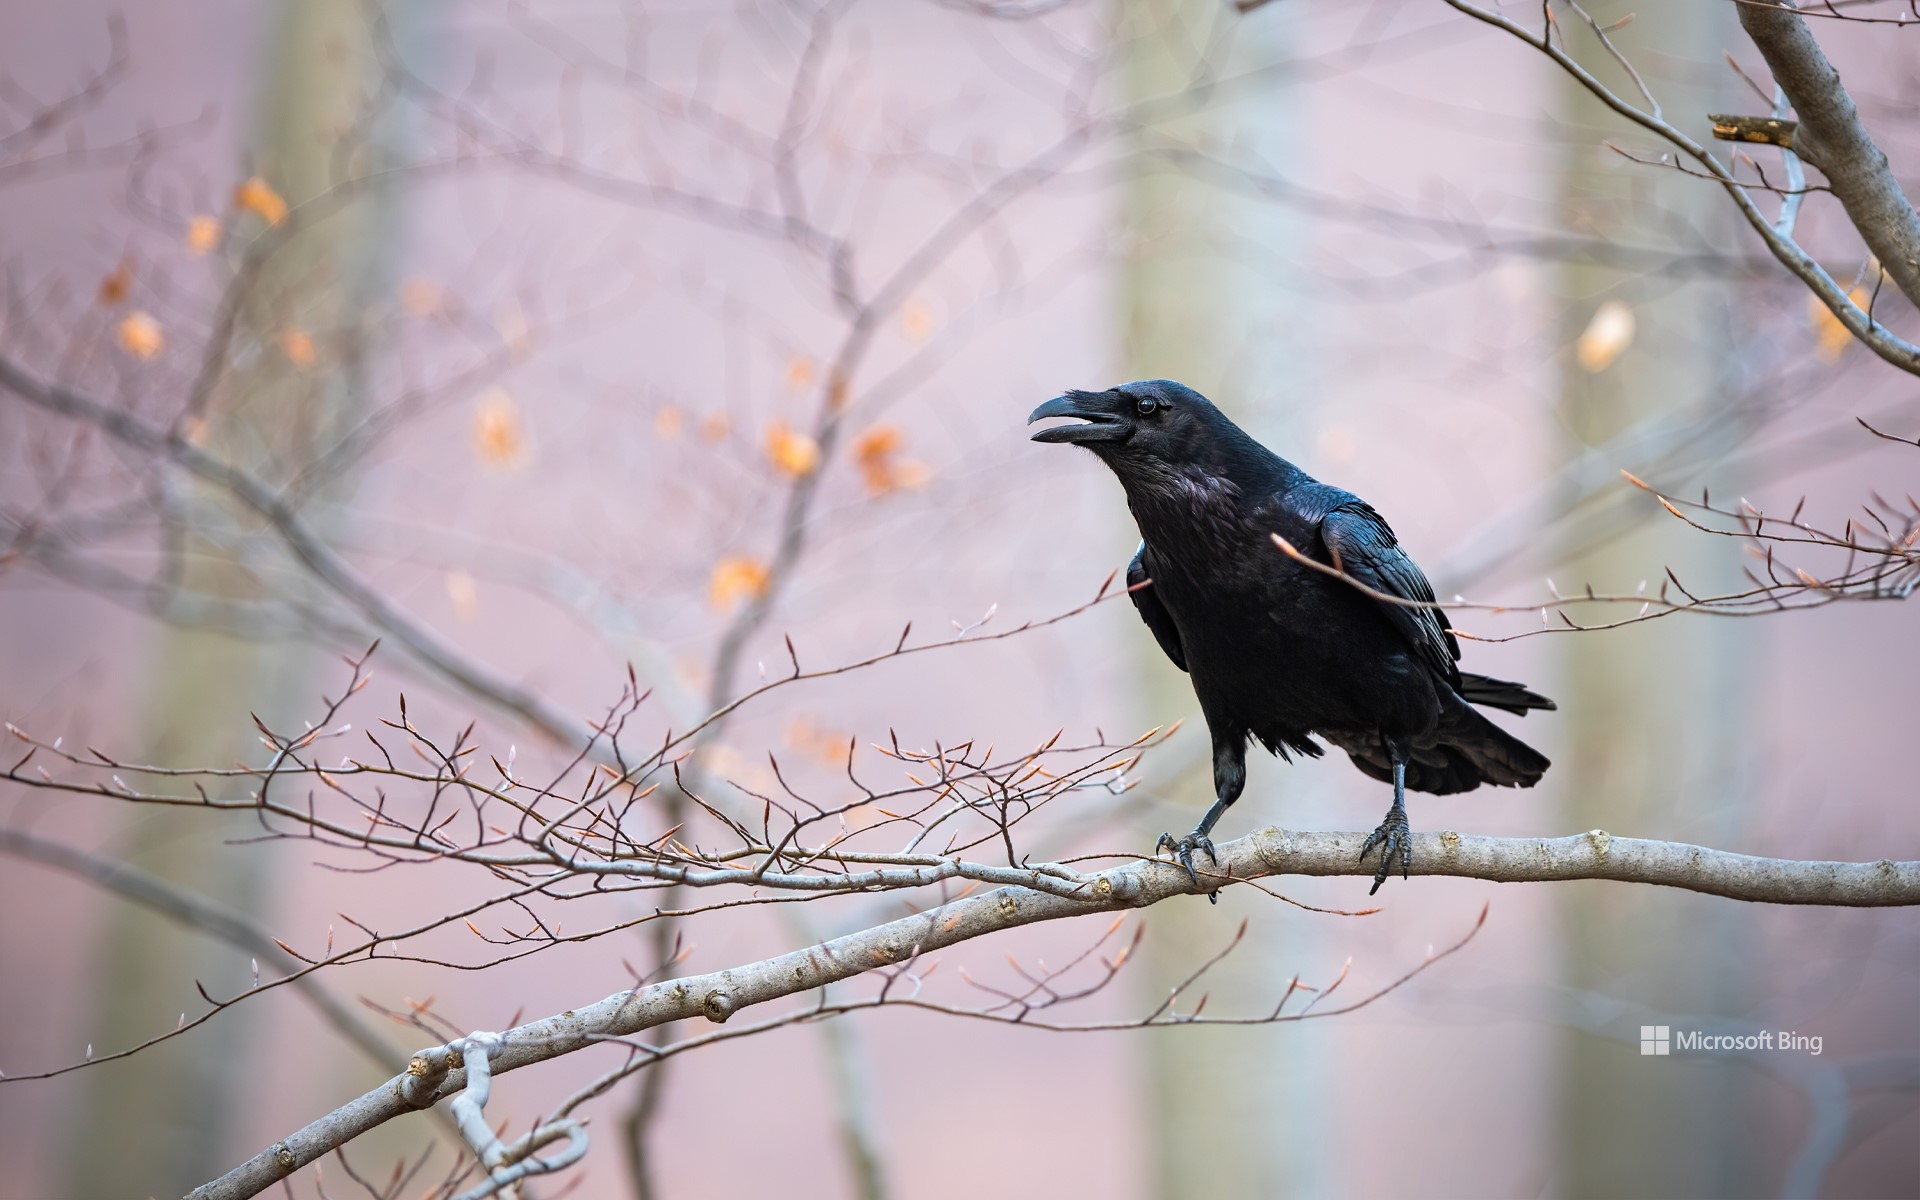 Common raven sitting on a branch